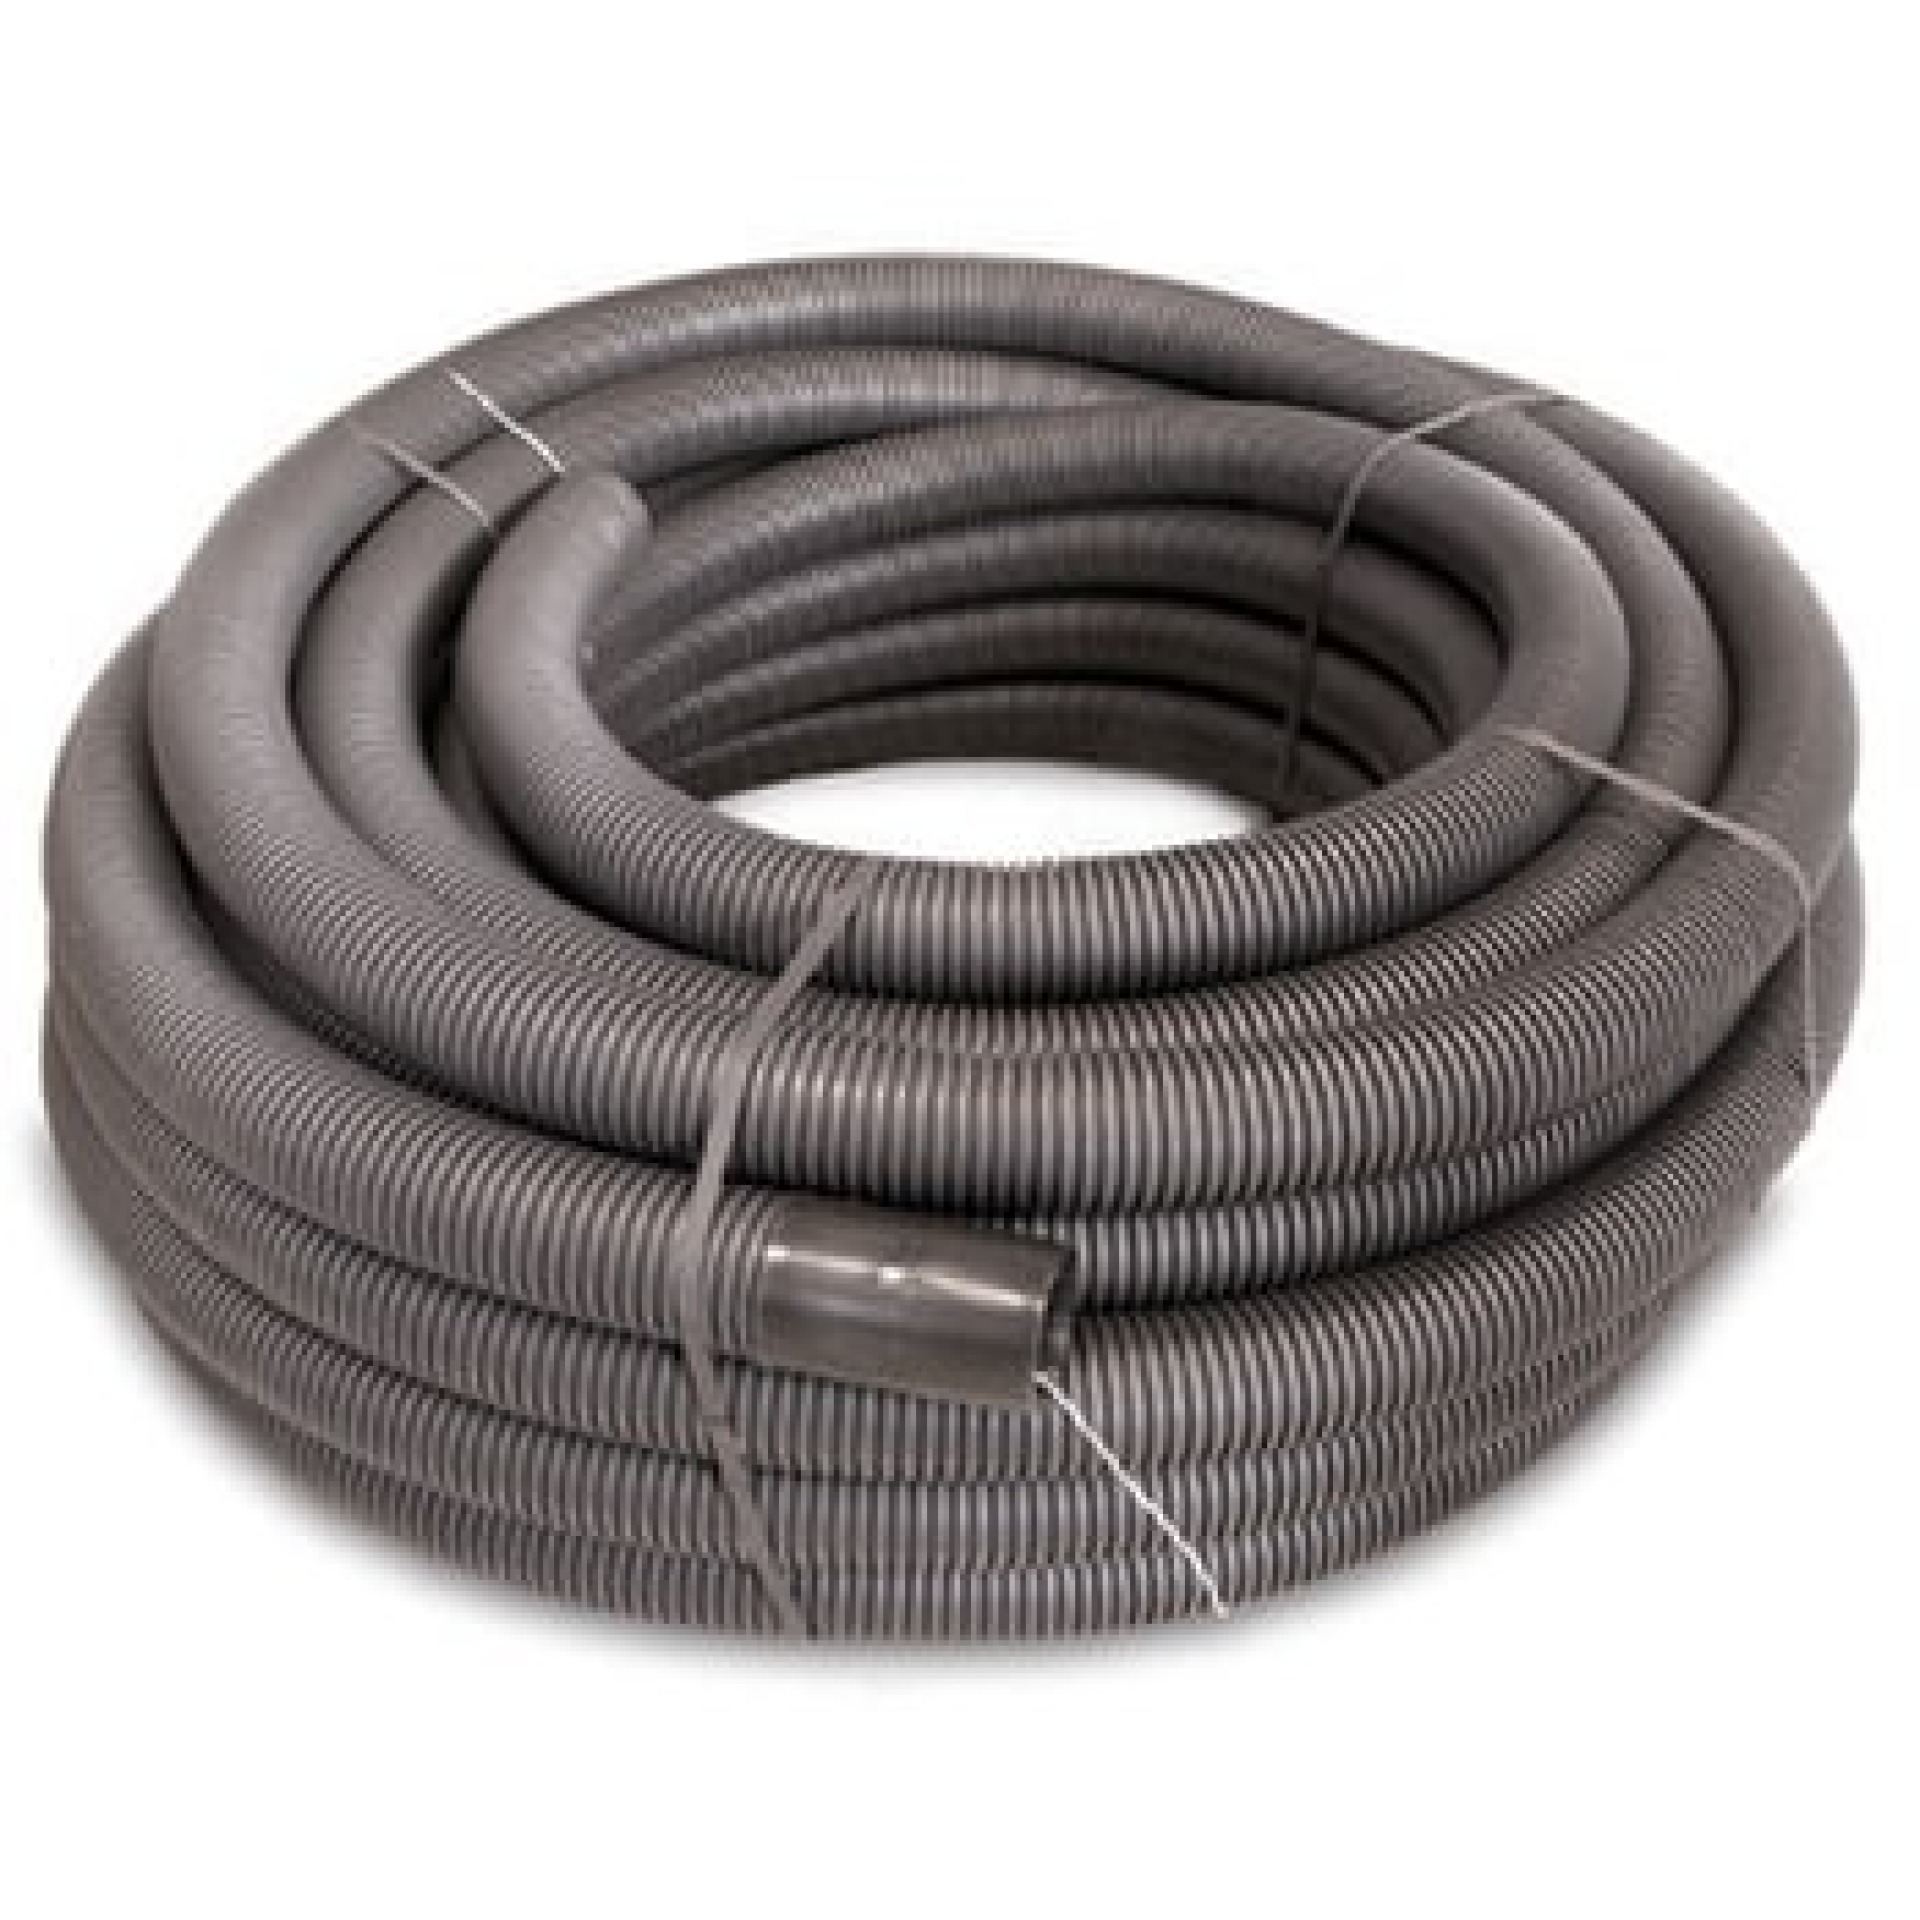 Flexible Conduit 63mm halogenfree, dobb wall, with draw-in wire black